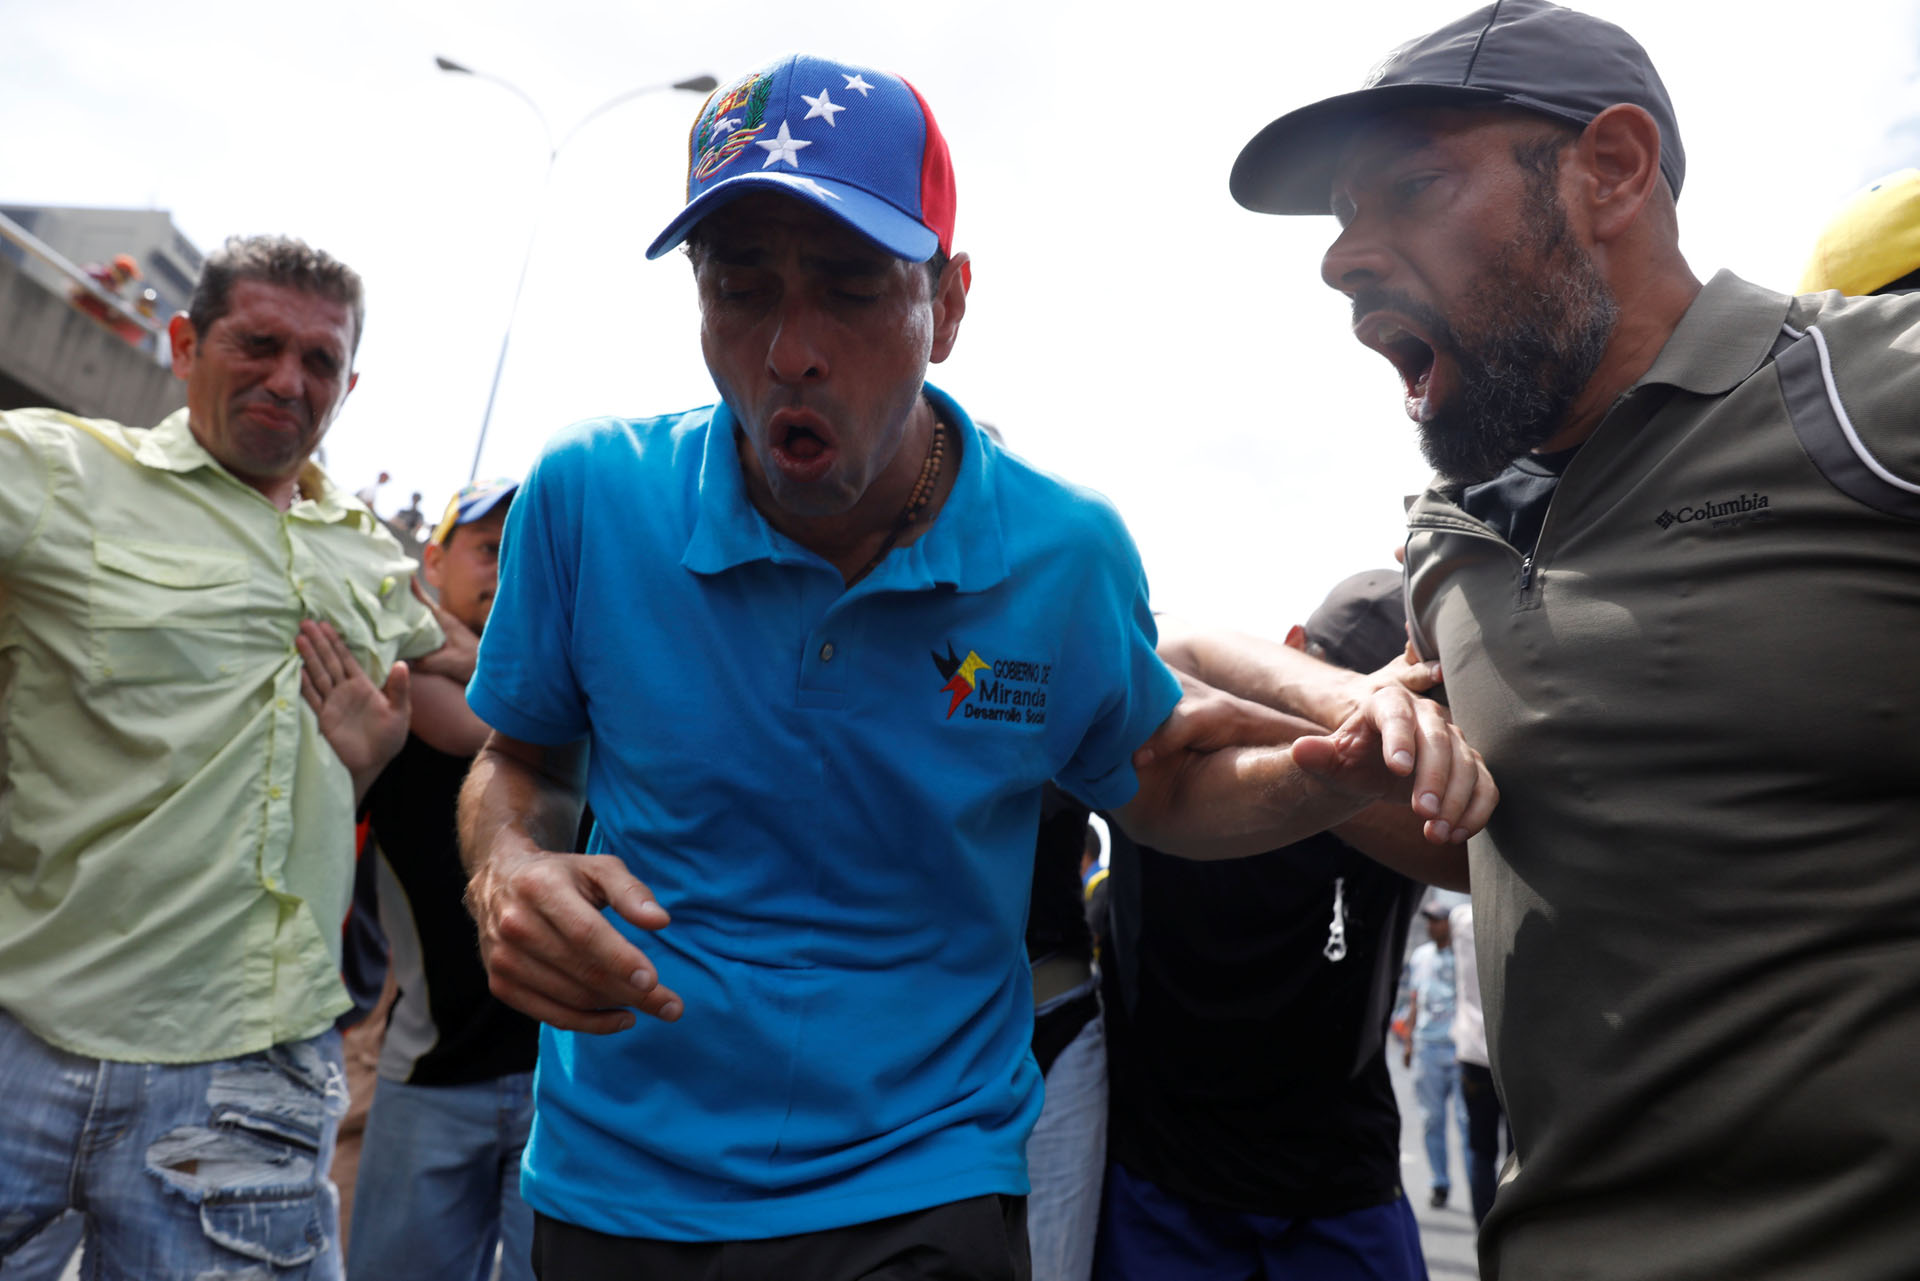 Opposition leader Henrique Capriles reacts after being exposed to tear gas during an opposition rally in Caracas, Venezuela April 6, 2017. REUTERS/Carlos Garcia Rawlins